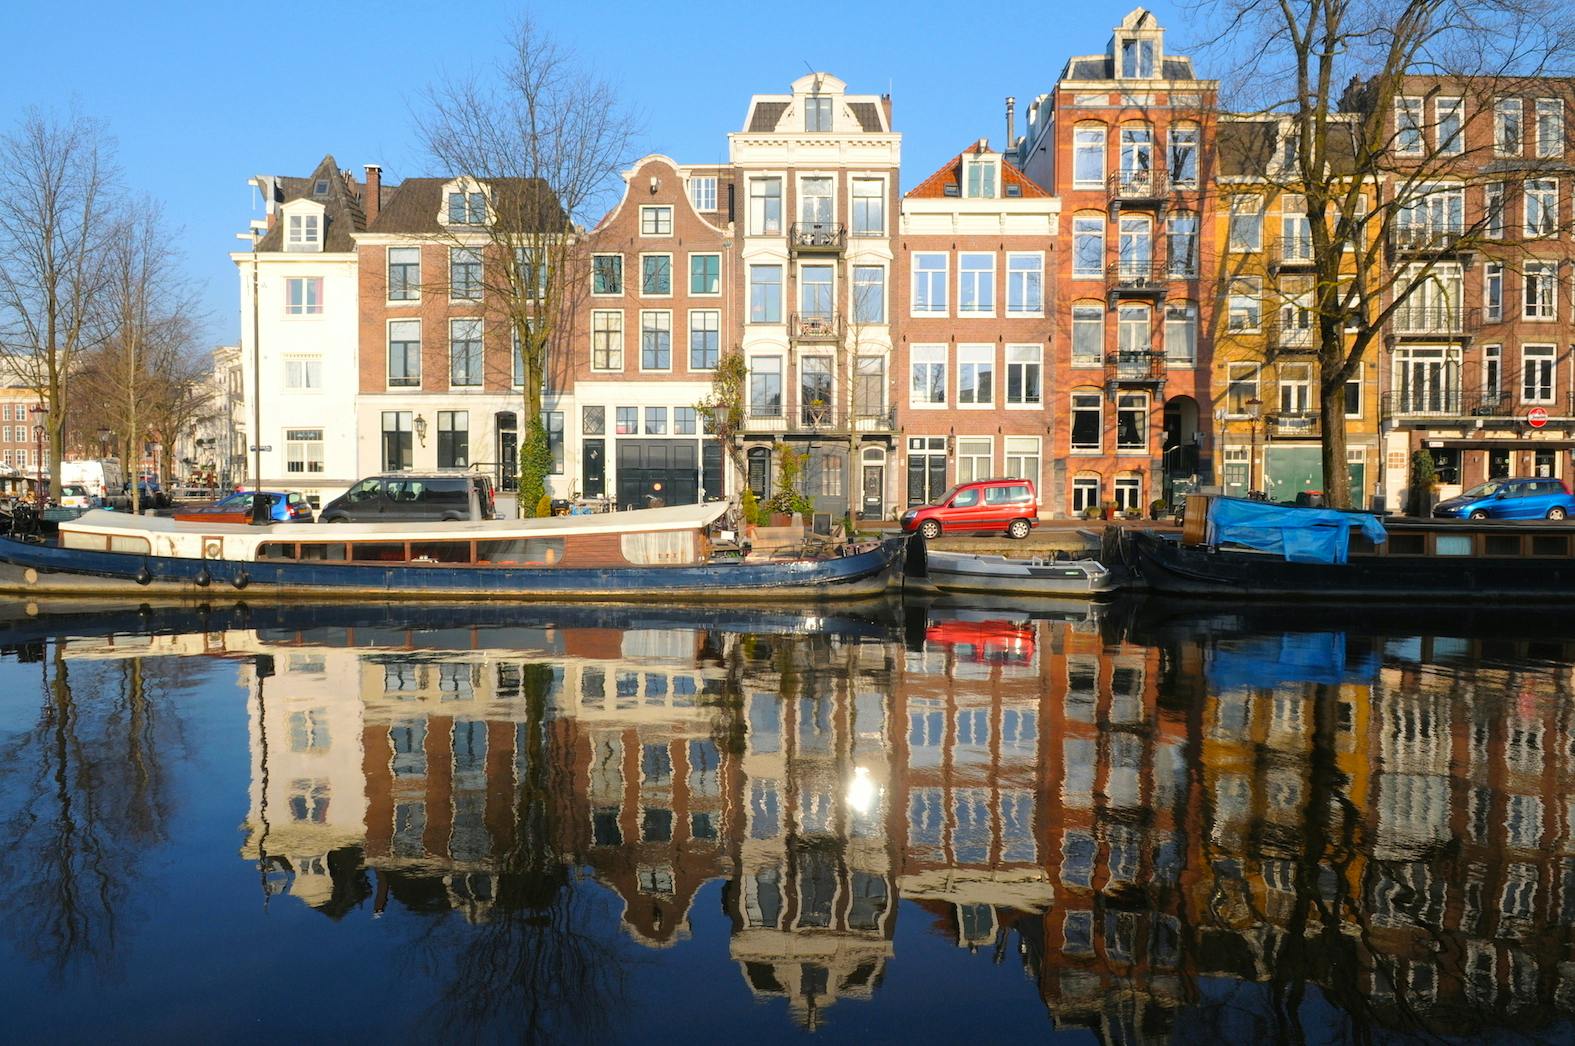 Enjoy the classic canal views with a guided tour through the Jordaan